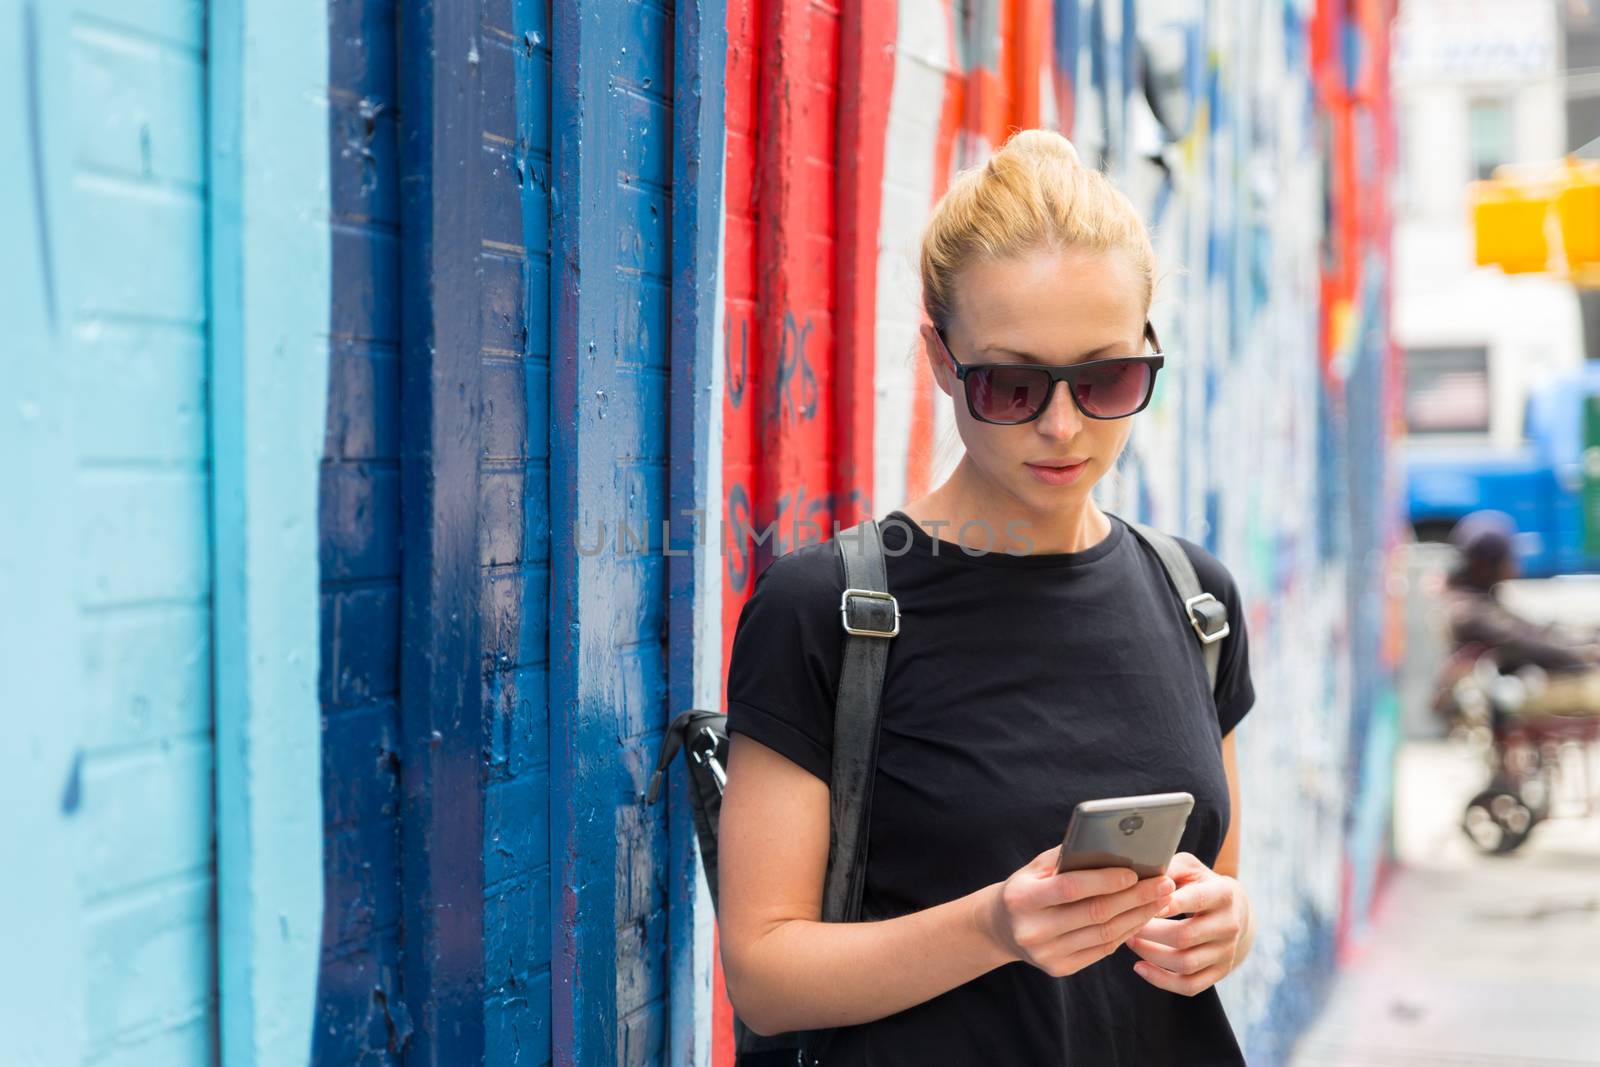 Closeup of female hipster with smart phone. Woman using smartphone against colorful graffiti wall in East Village, New York city, USA.